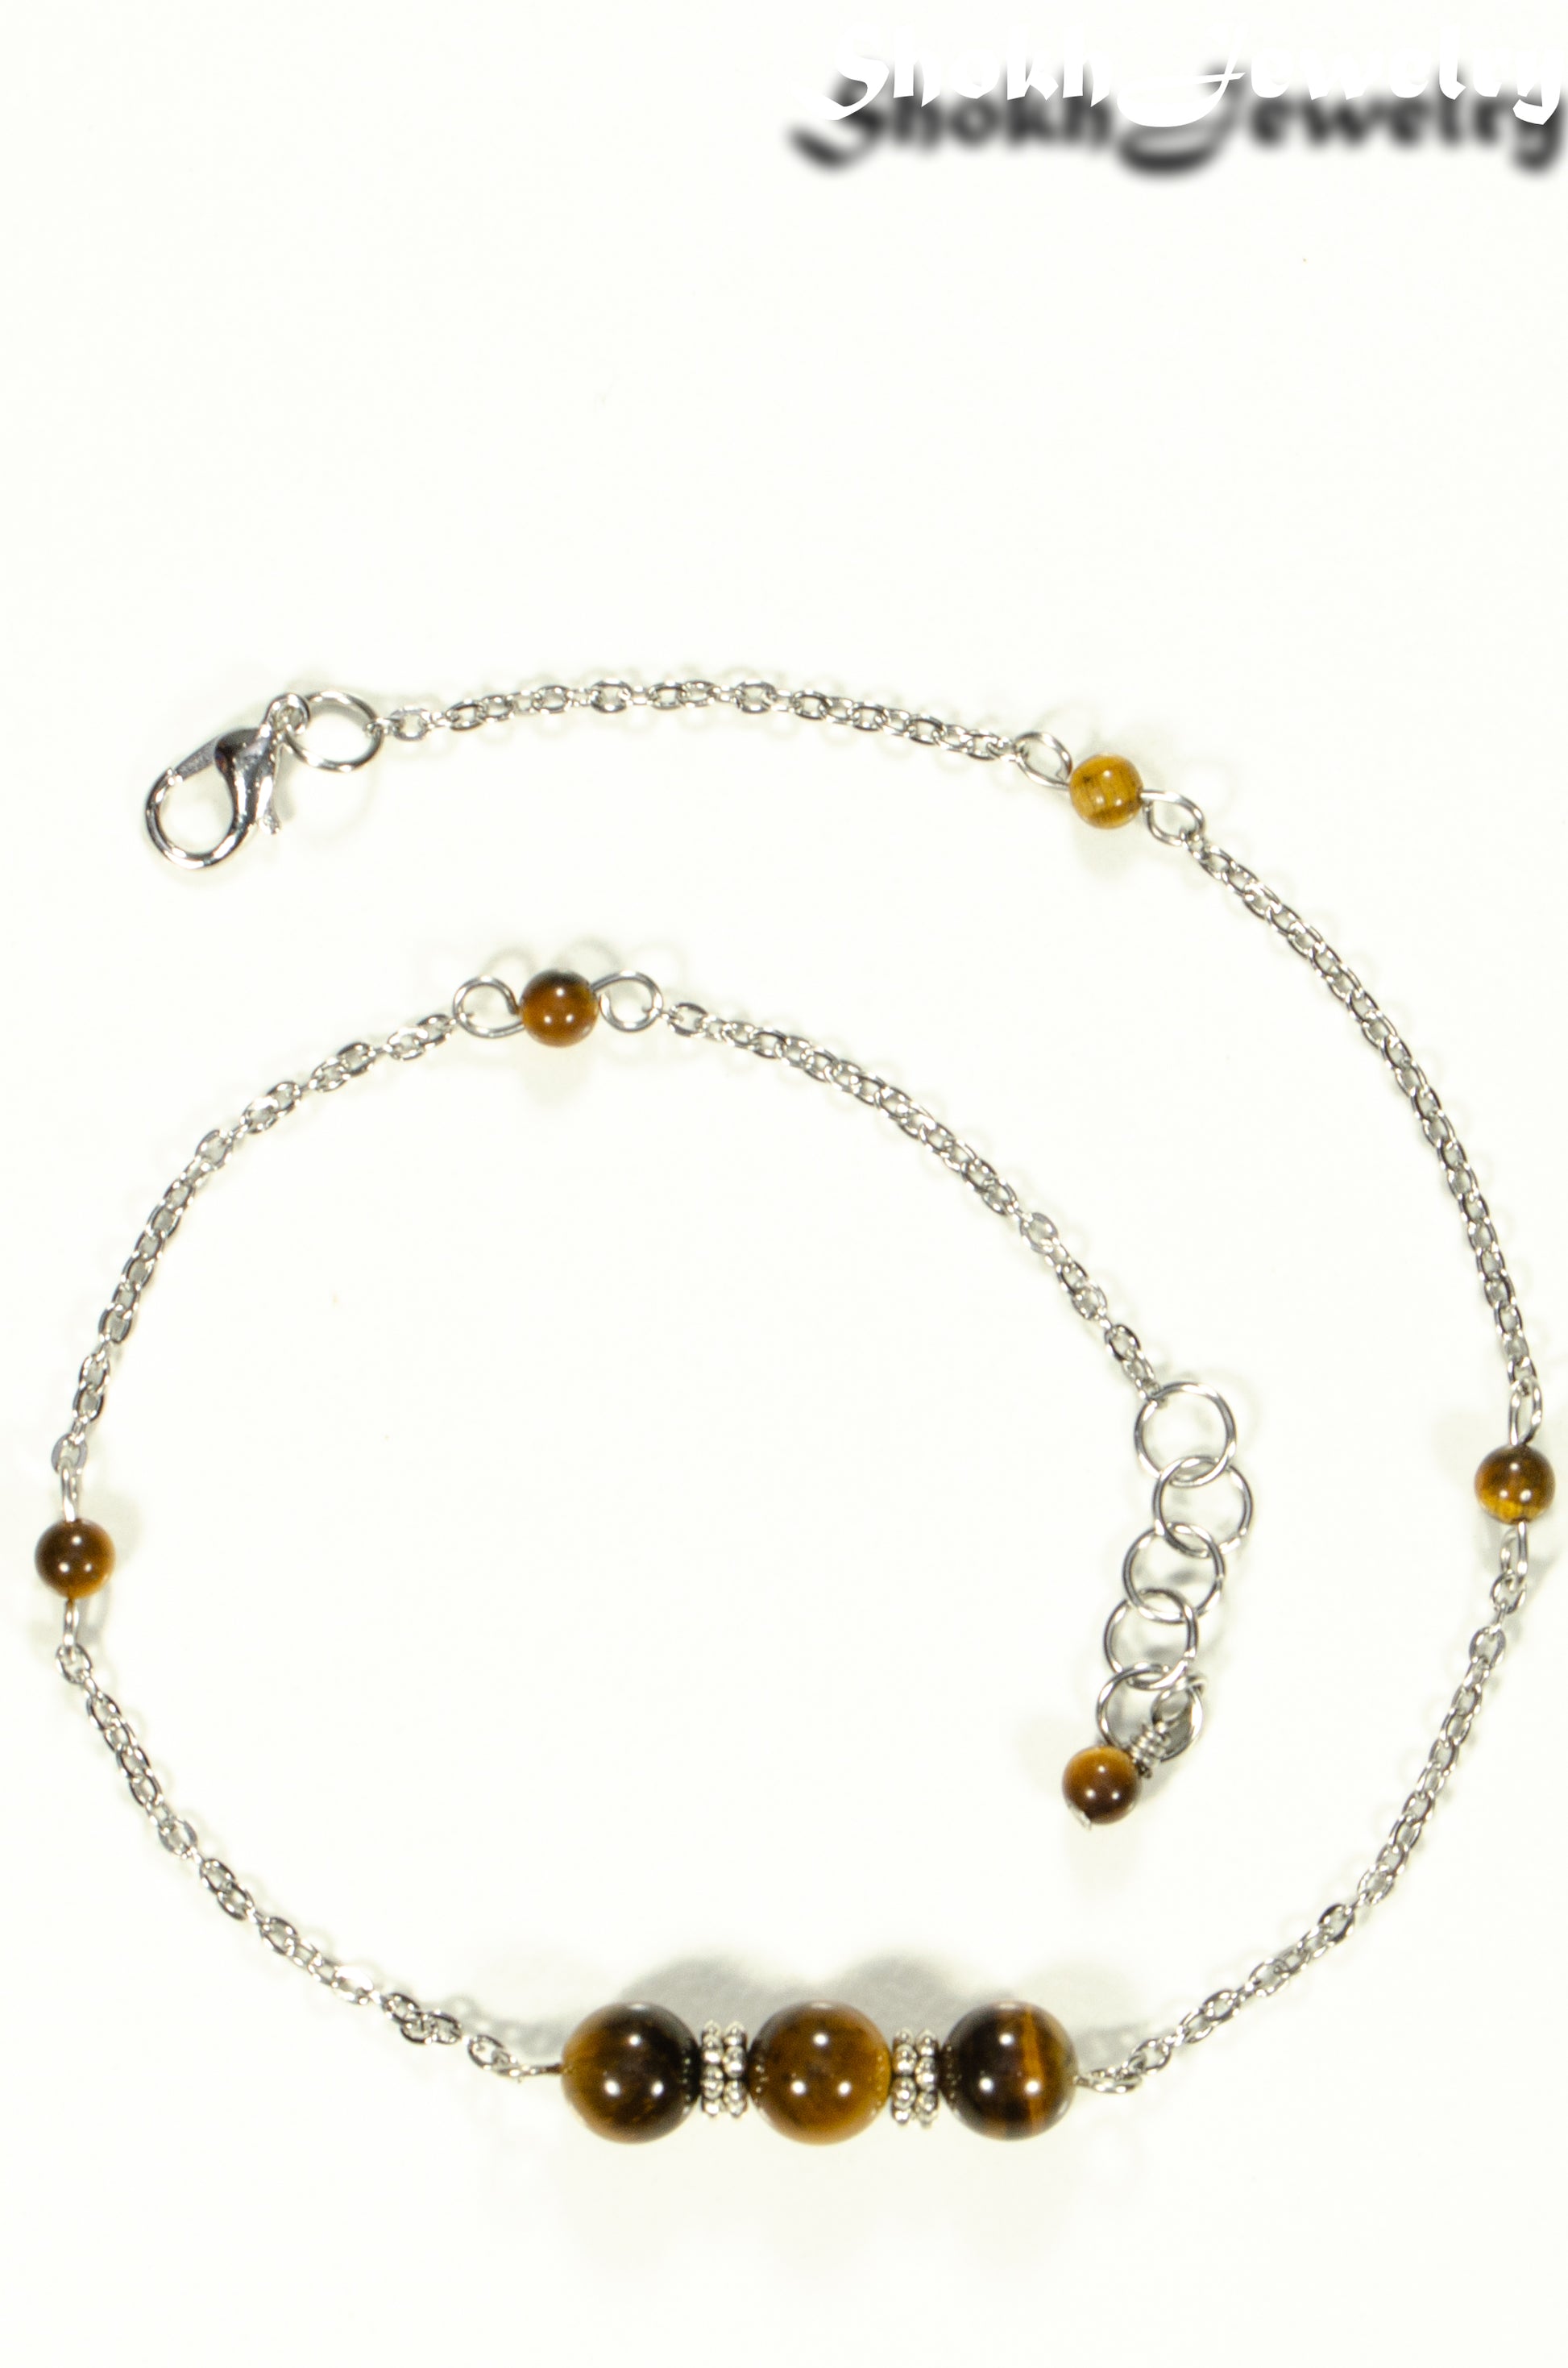 Top view of Natural Tiger's Eye and Chain Choker Necklace.